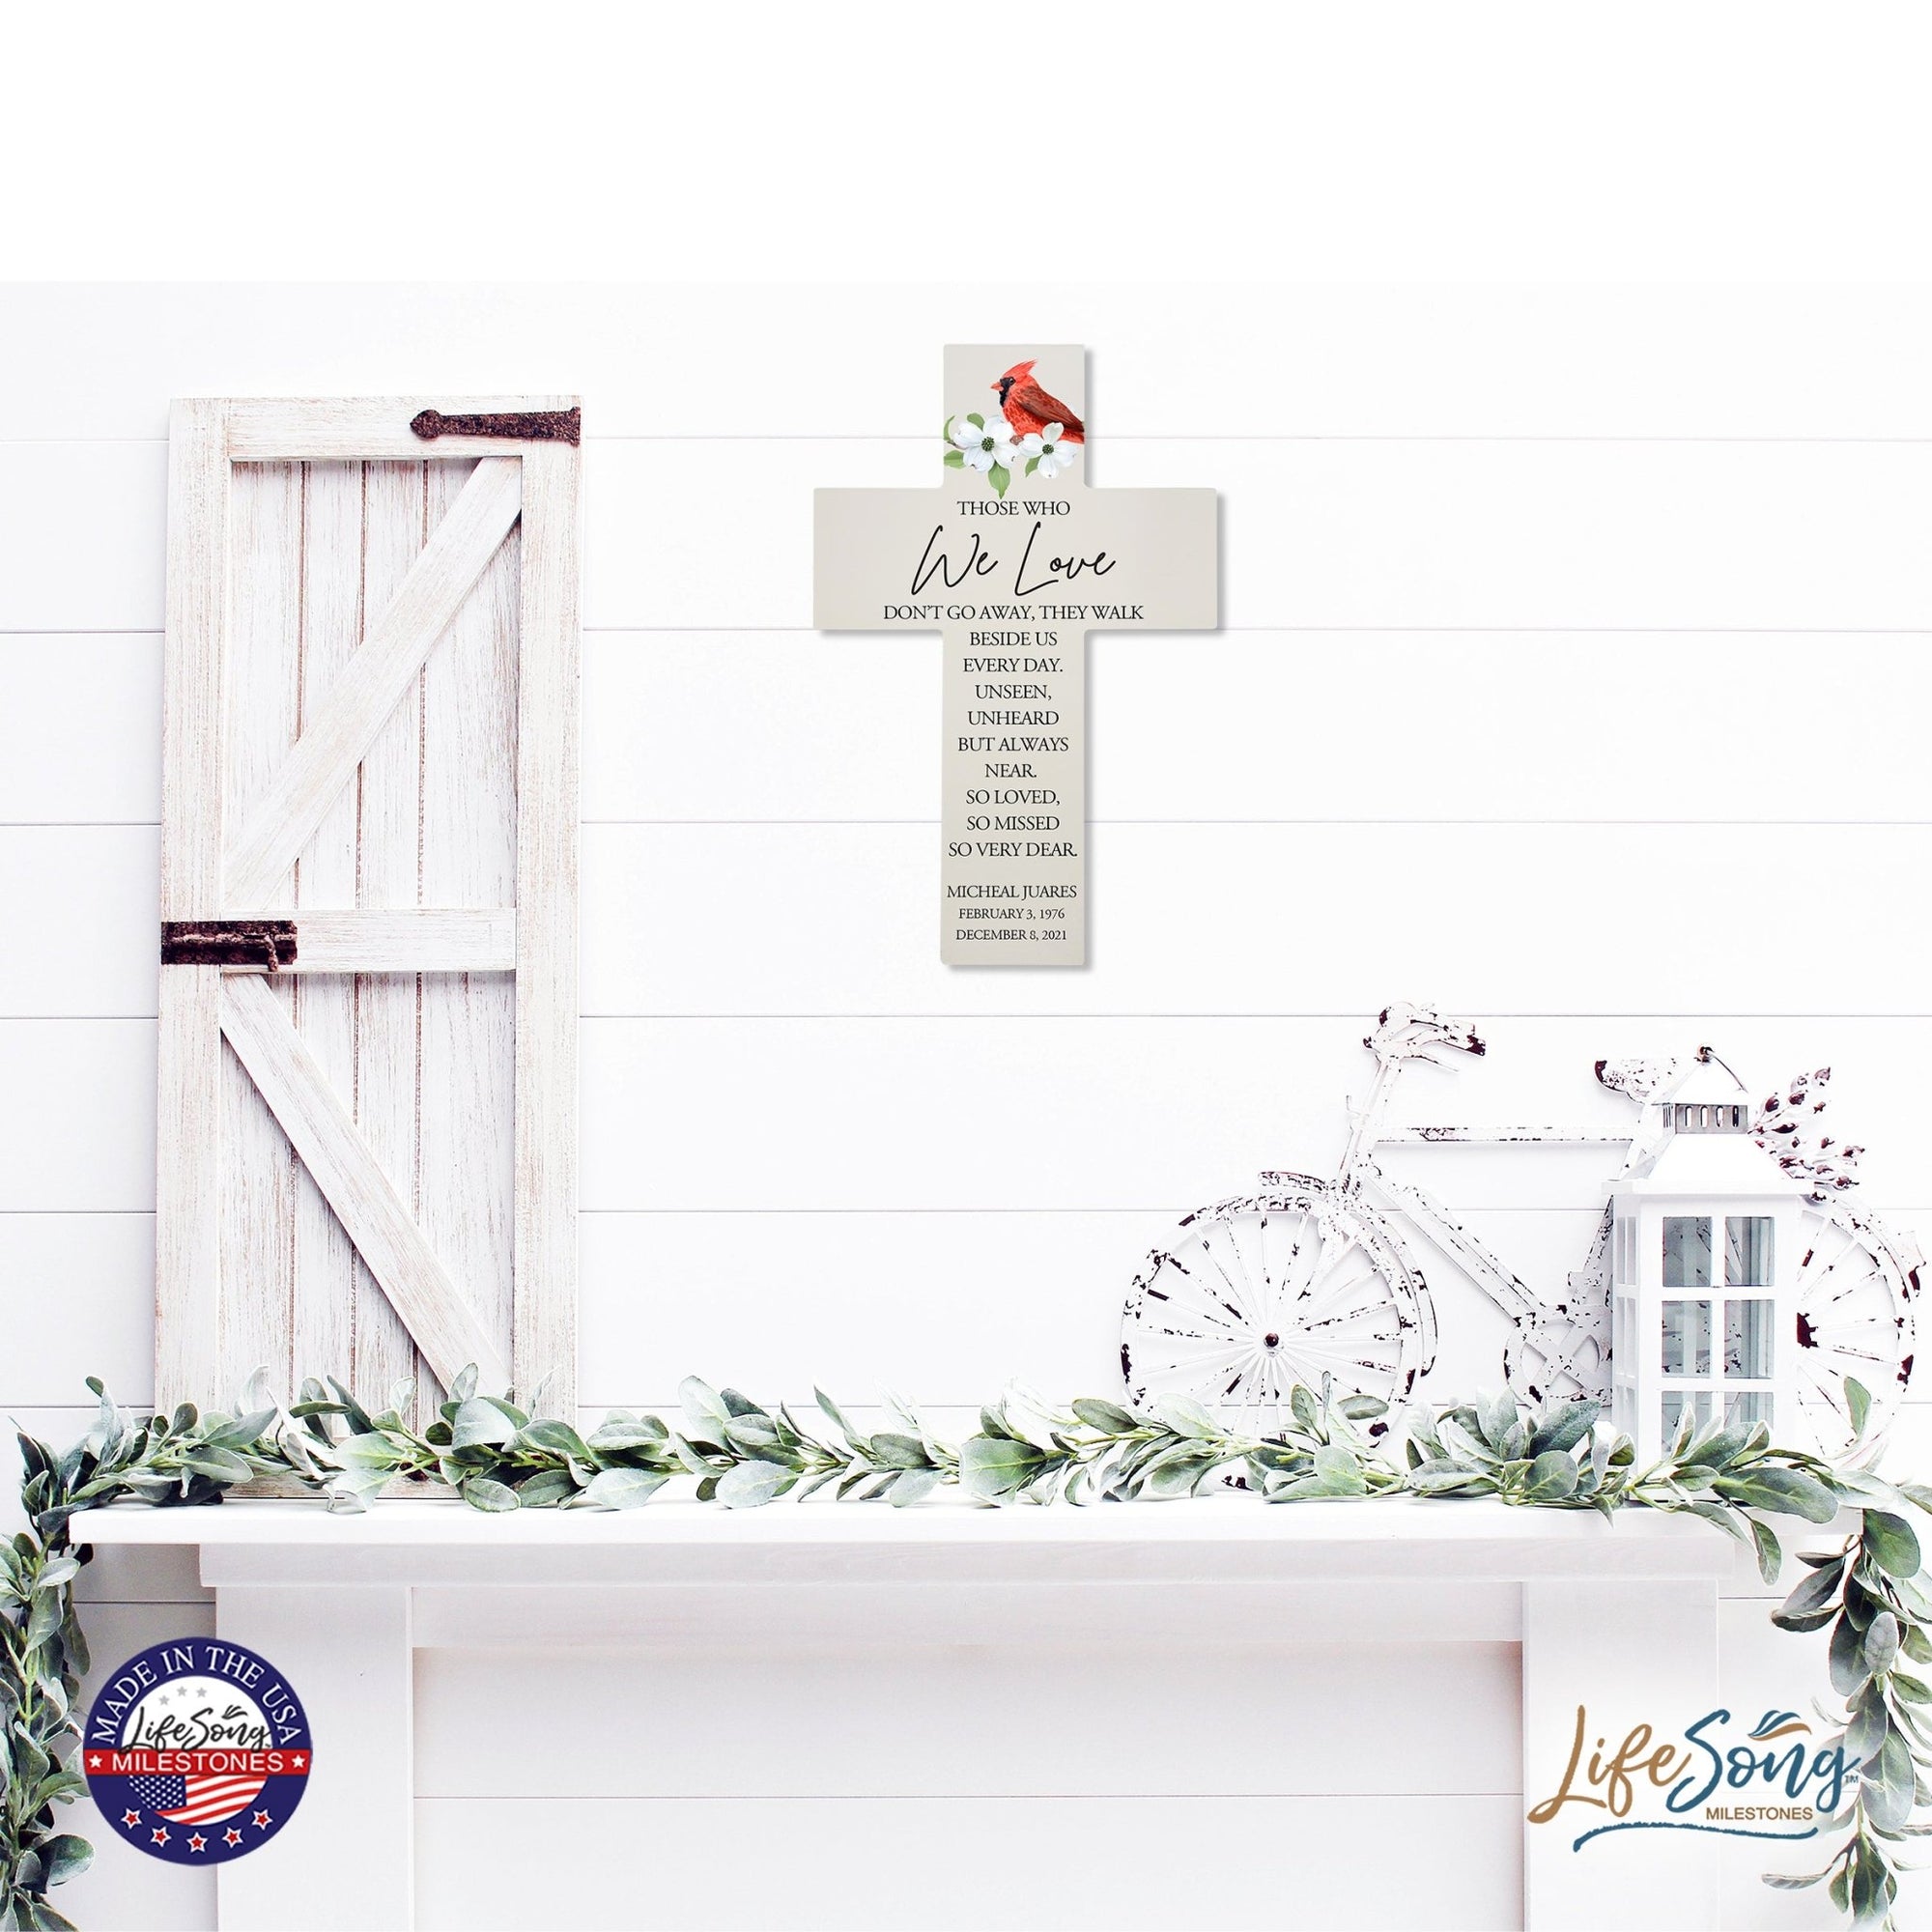 Personalized Red Cardinal Memorial Bereavement Wall Cross For Loss of Loved One Those Who We Love (Cardinal) Quote 14 x 9.25 Those Who We Love Don't Go Away, They Walk Beside Us Everyday - LifeSong Milestones